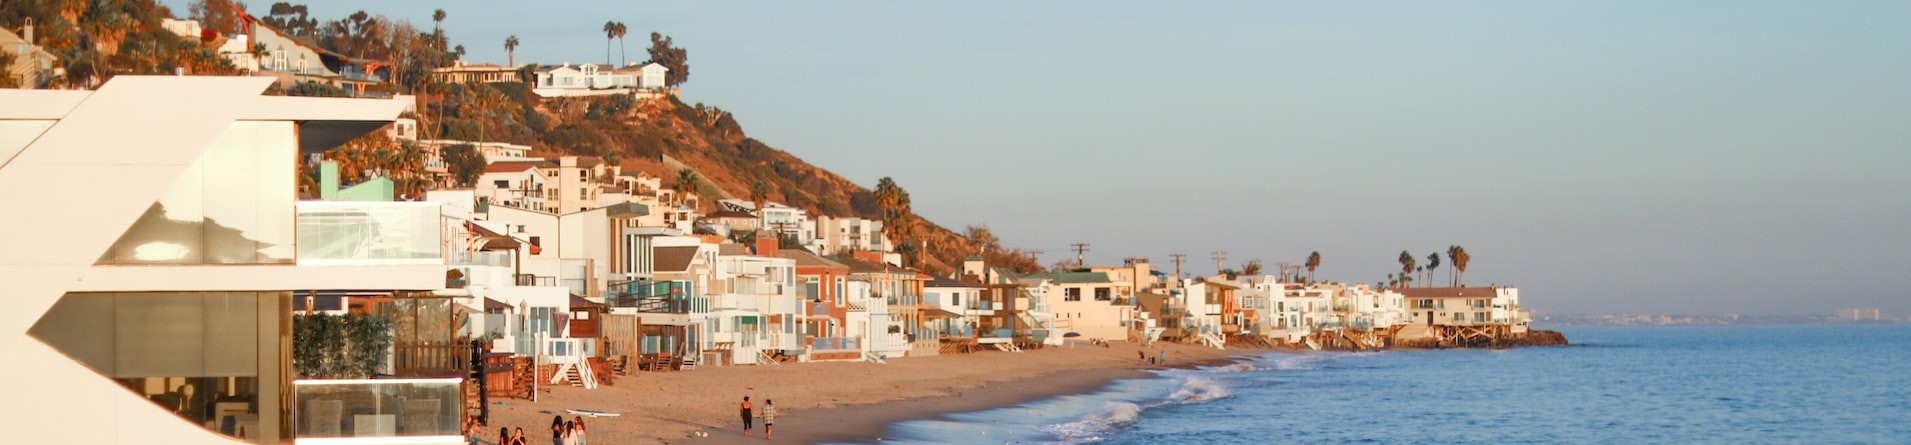 Sunset afternoon in Malibu | Breast Cancer Car Donations